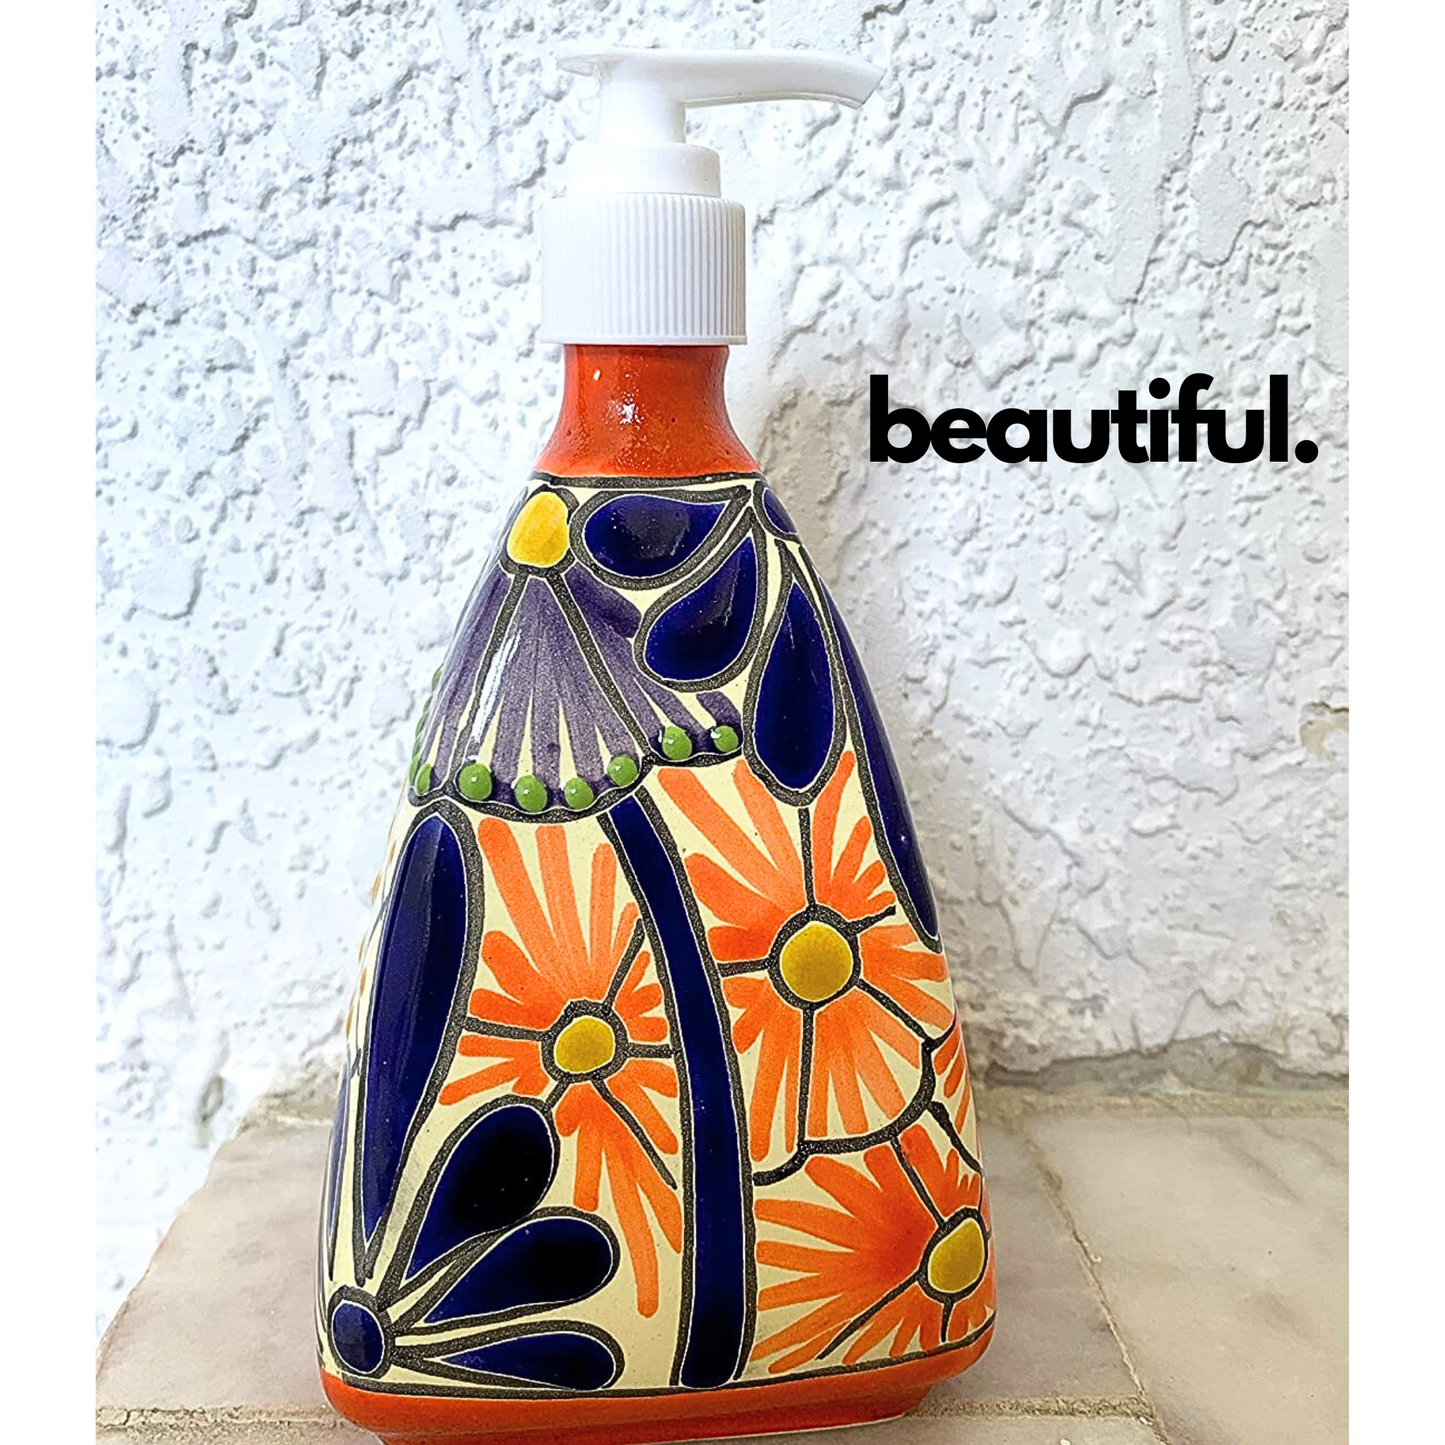 other side of Pyramid-shaped Ceramic Soap Dispenser, hand-painted by Mexican artisans, perfect for adding a vibrant touch to kitchen or bathroom decor.